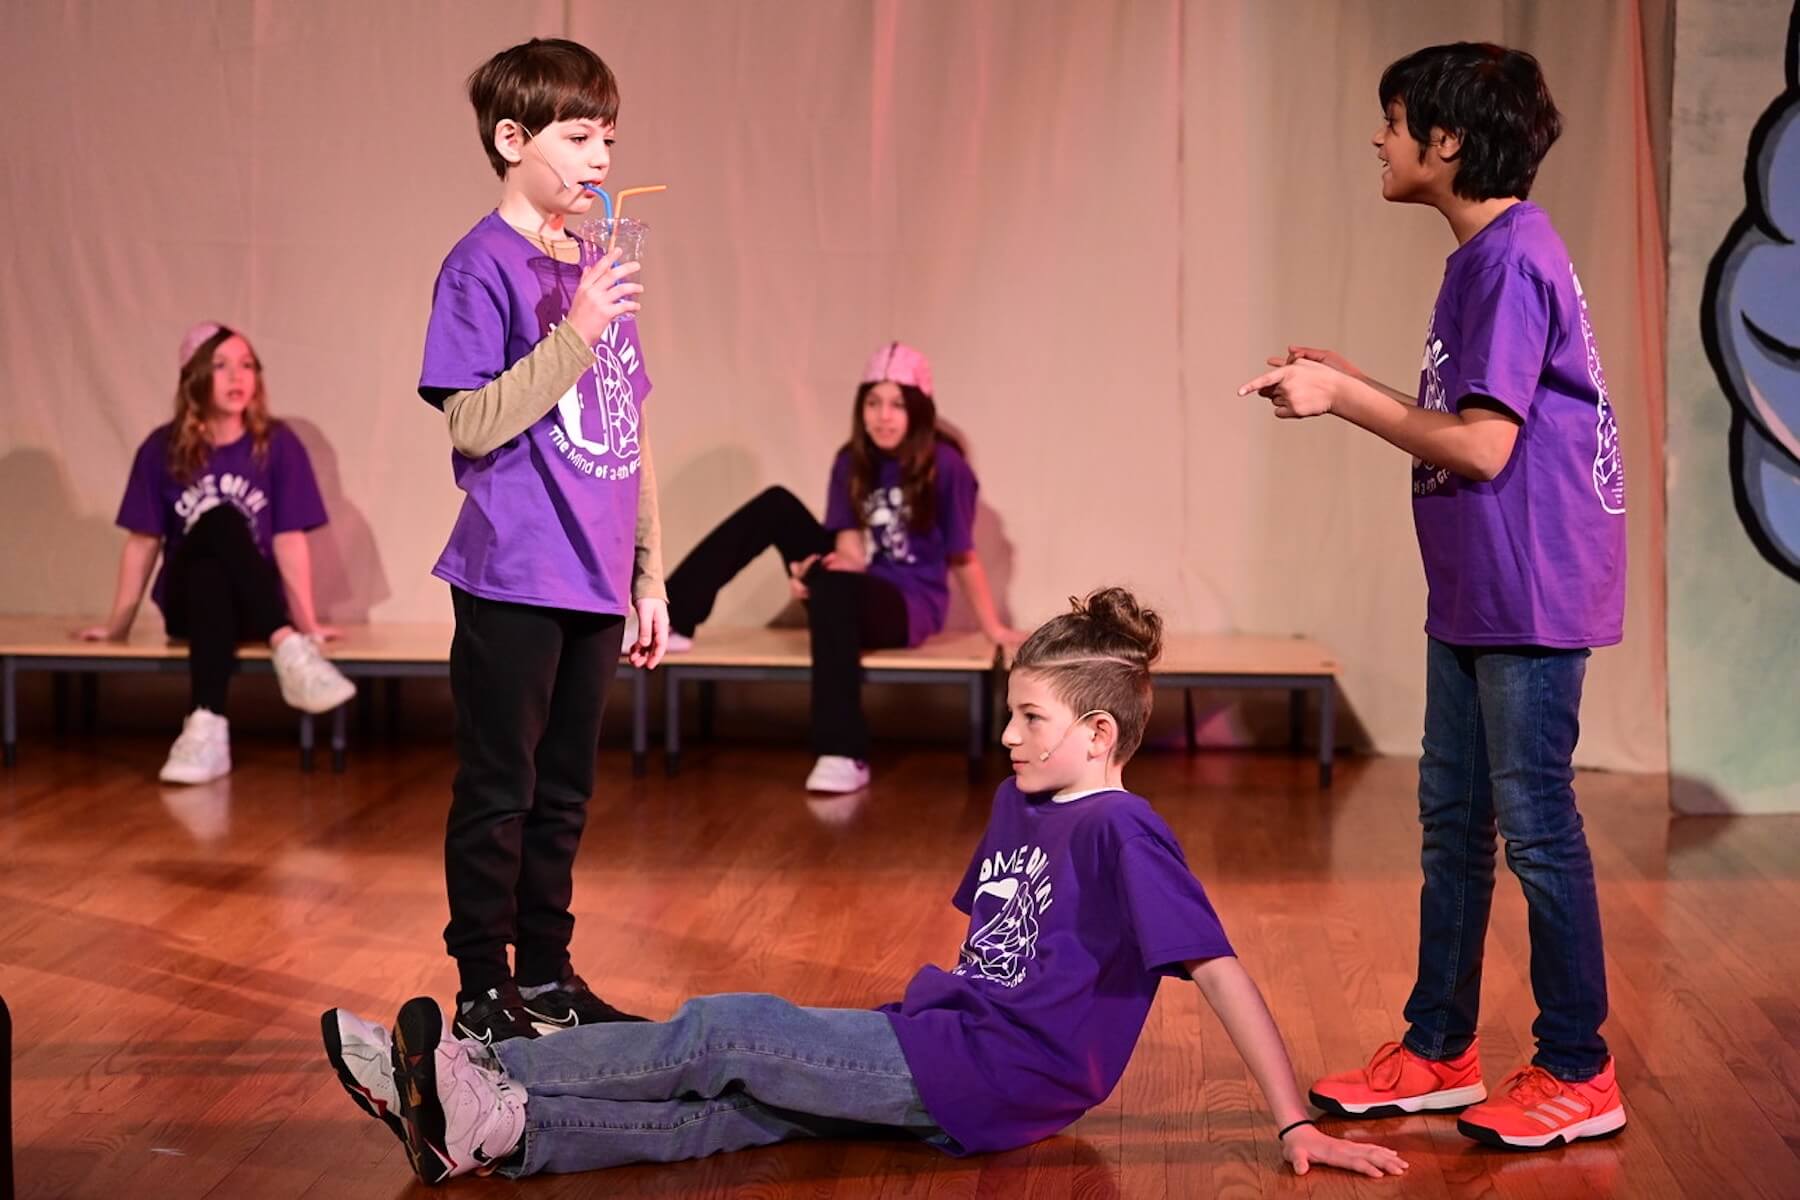 Three Ethical Culture students dressed in purple perform on stage during 4th Grade play. One student sits on stage with legs crossed while two others stand engaged in conversation.